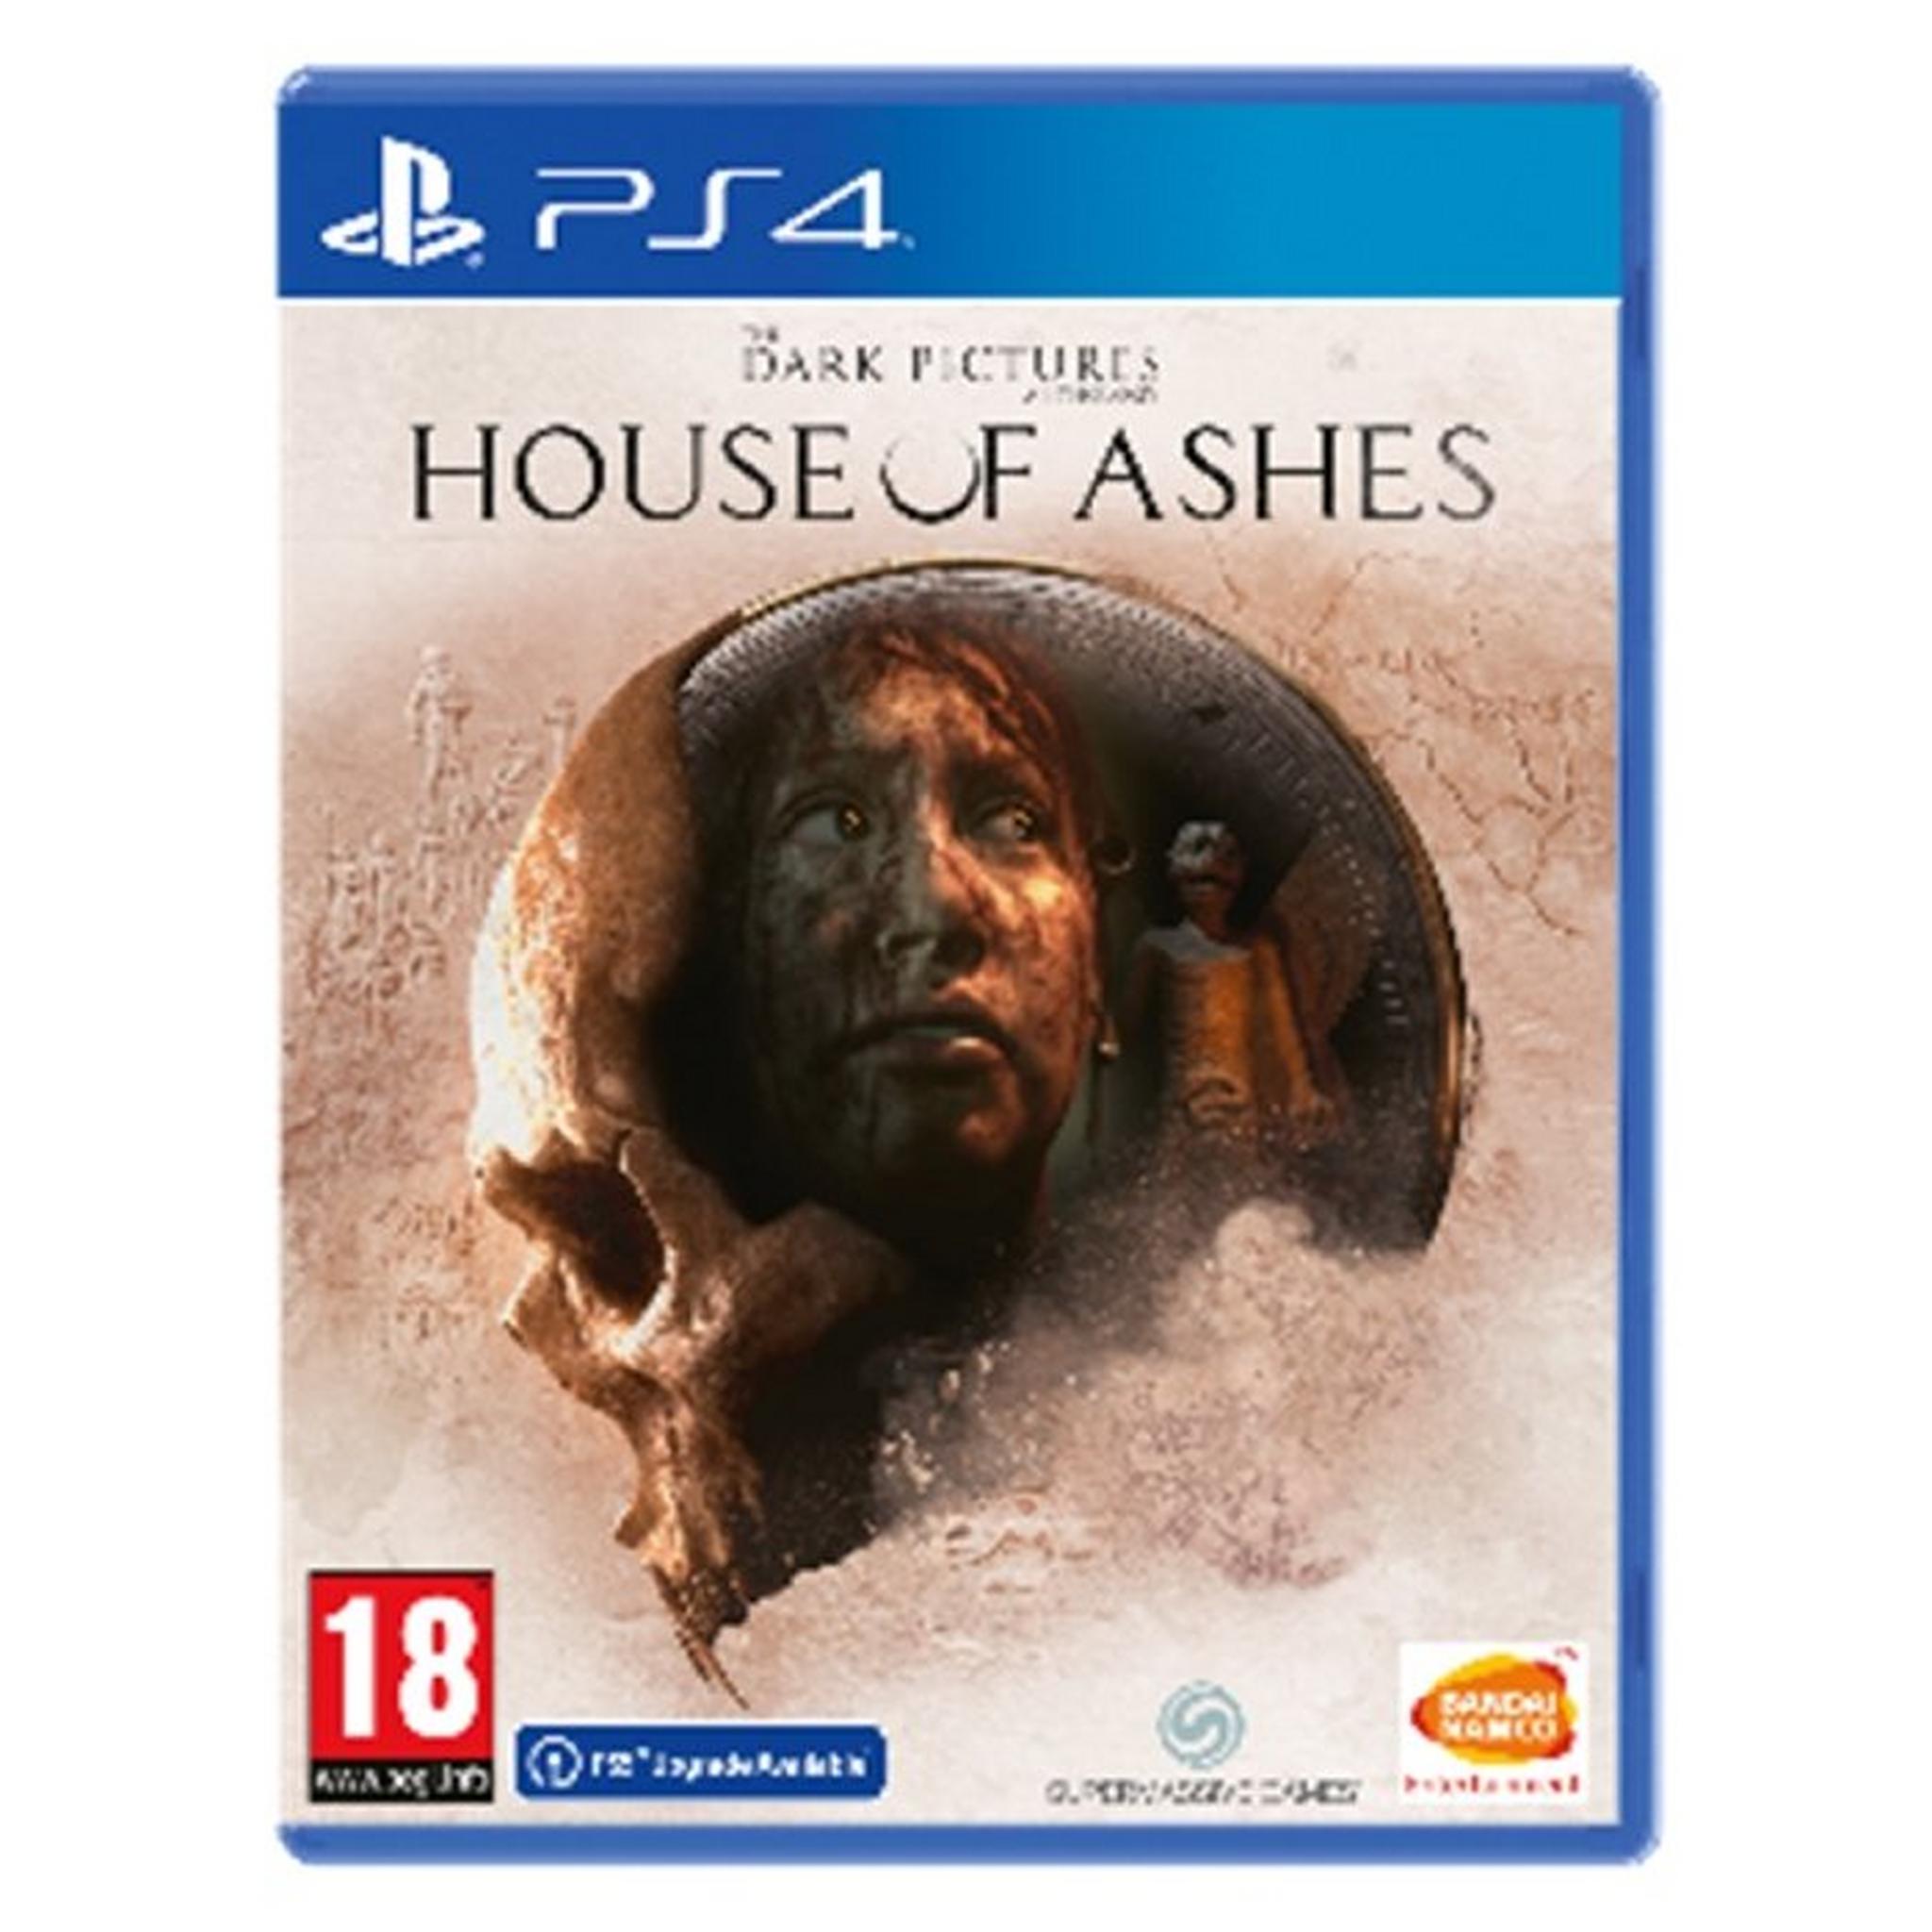 The Dark Pictures Anthology House of Ashes - PS4 Game